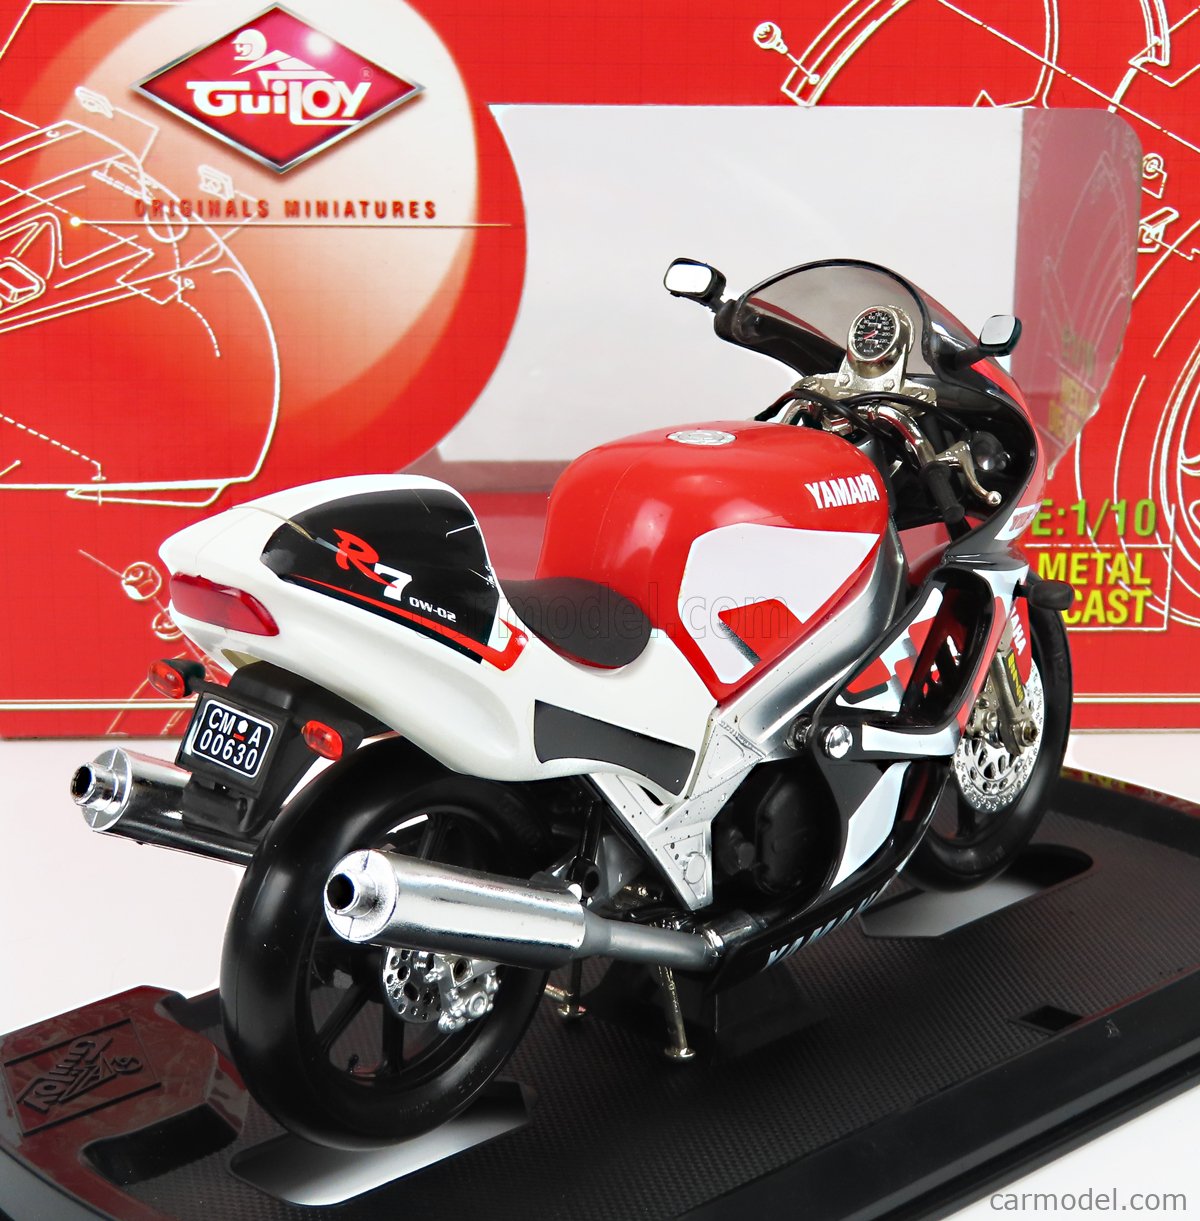 GUILOY 13640 Scala 1/10  YAMAHA YZF R7 OW-02 1988 RED WHITE BLACK